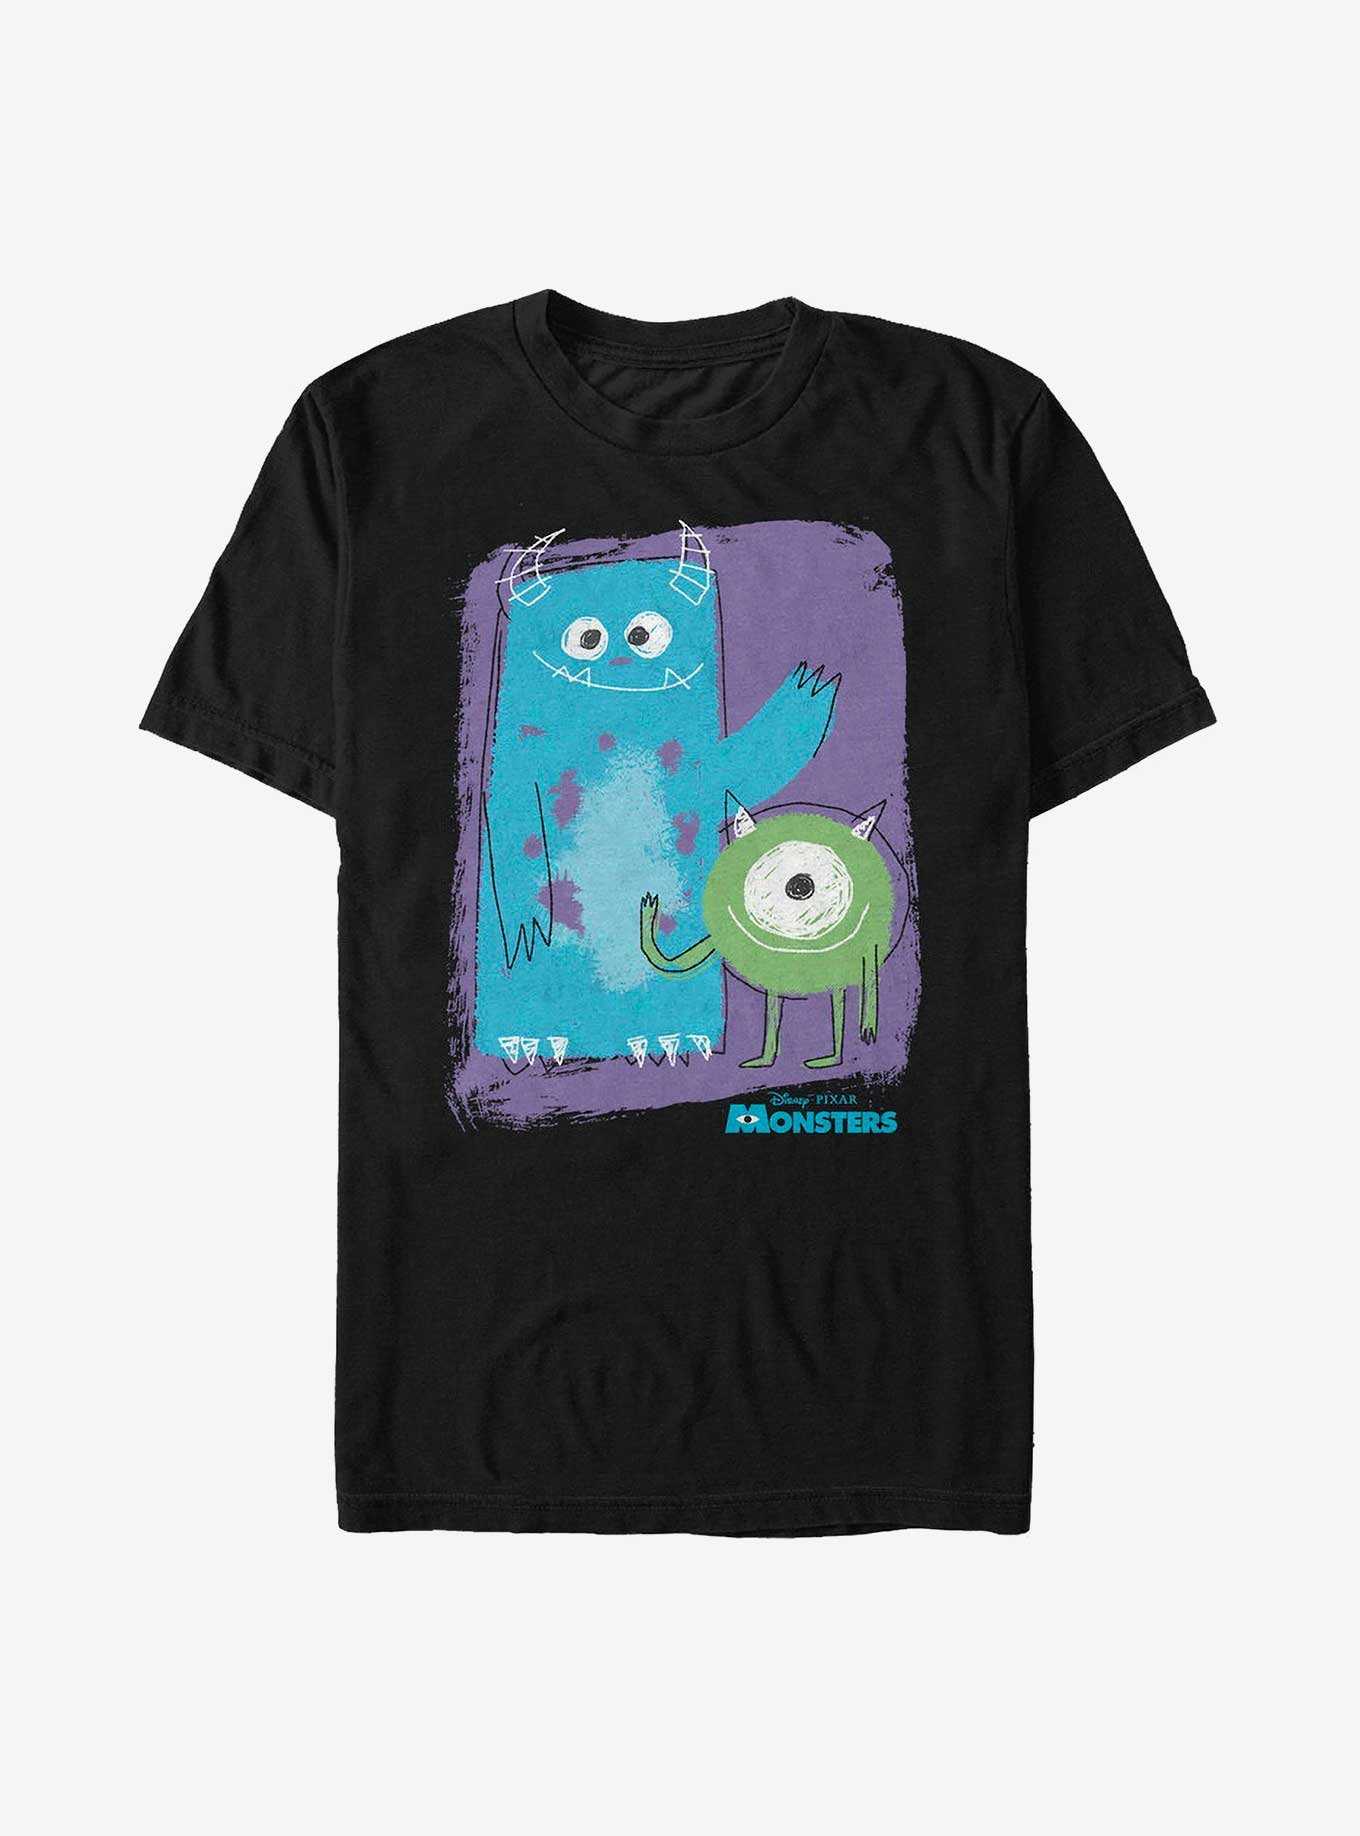 Disney Pixar Monsters Inc. Sulley and Mike Chalk Drawing Extra Soft T-Shirt, , hi-res